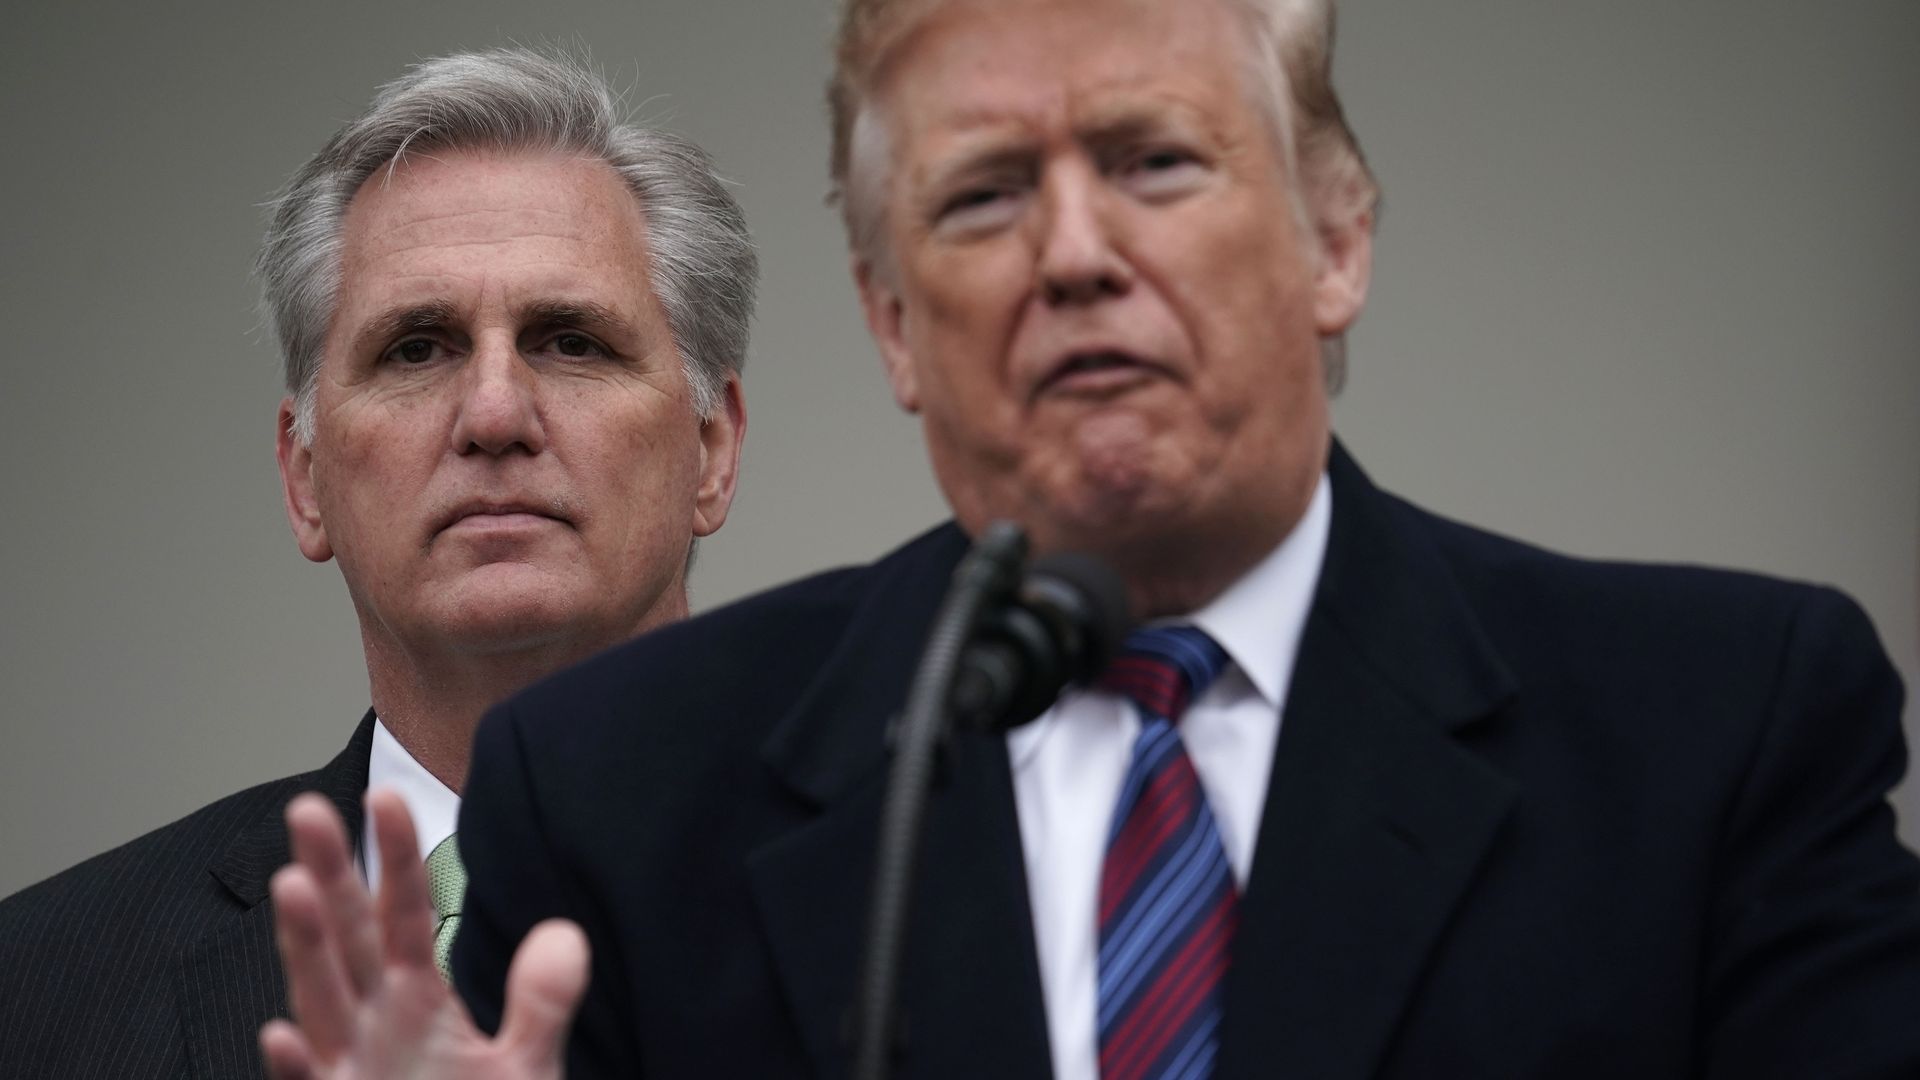 Picture of Donald Trump speaking into a microphone with Kevin McCarthy standing in the background